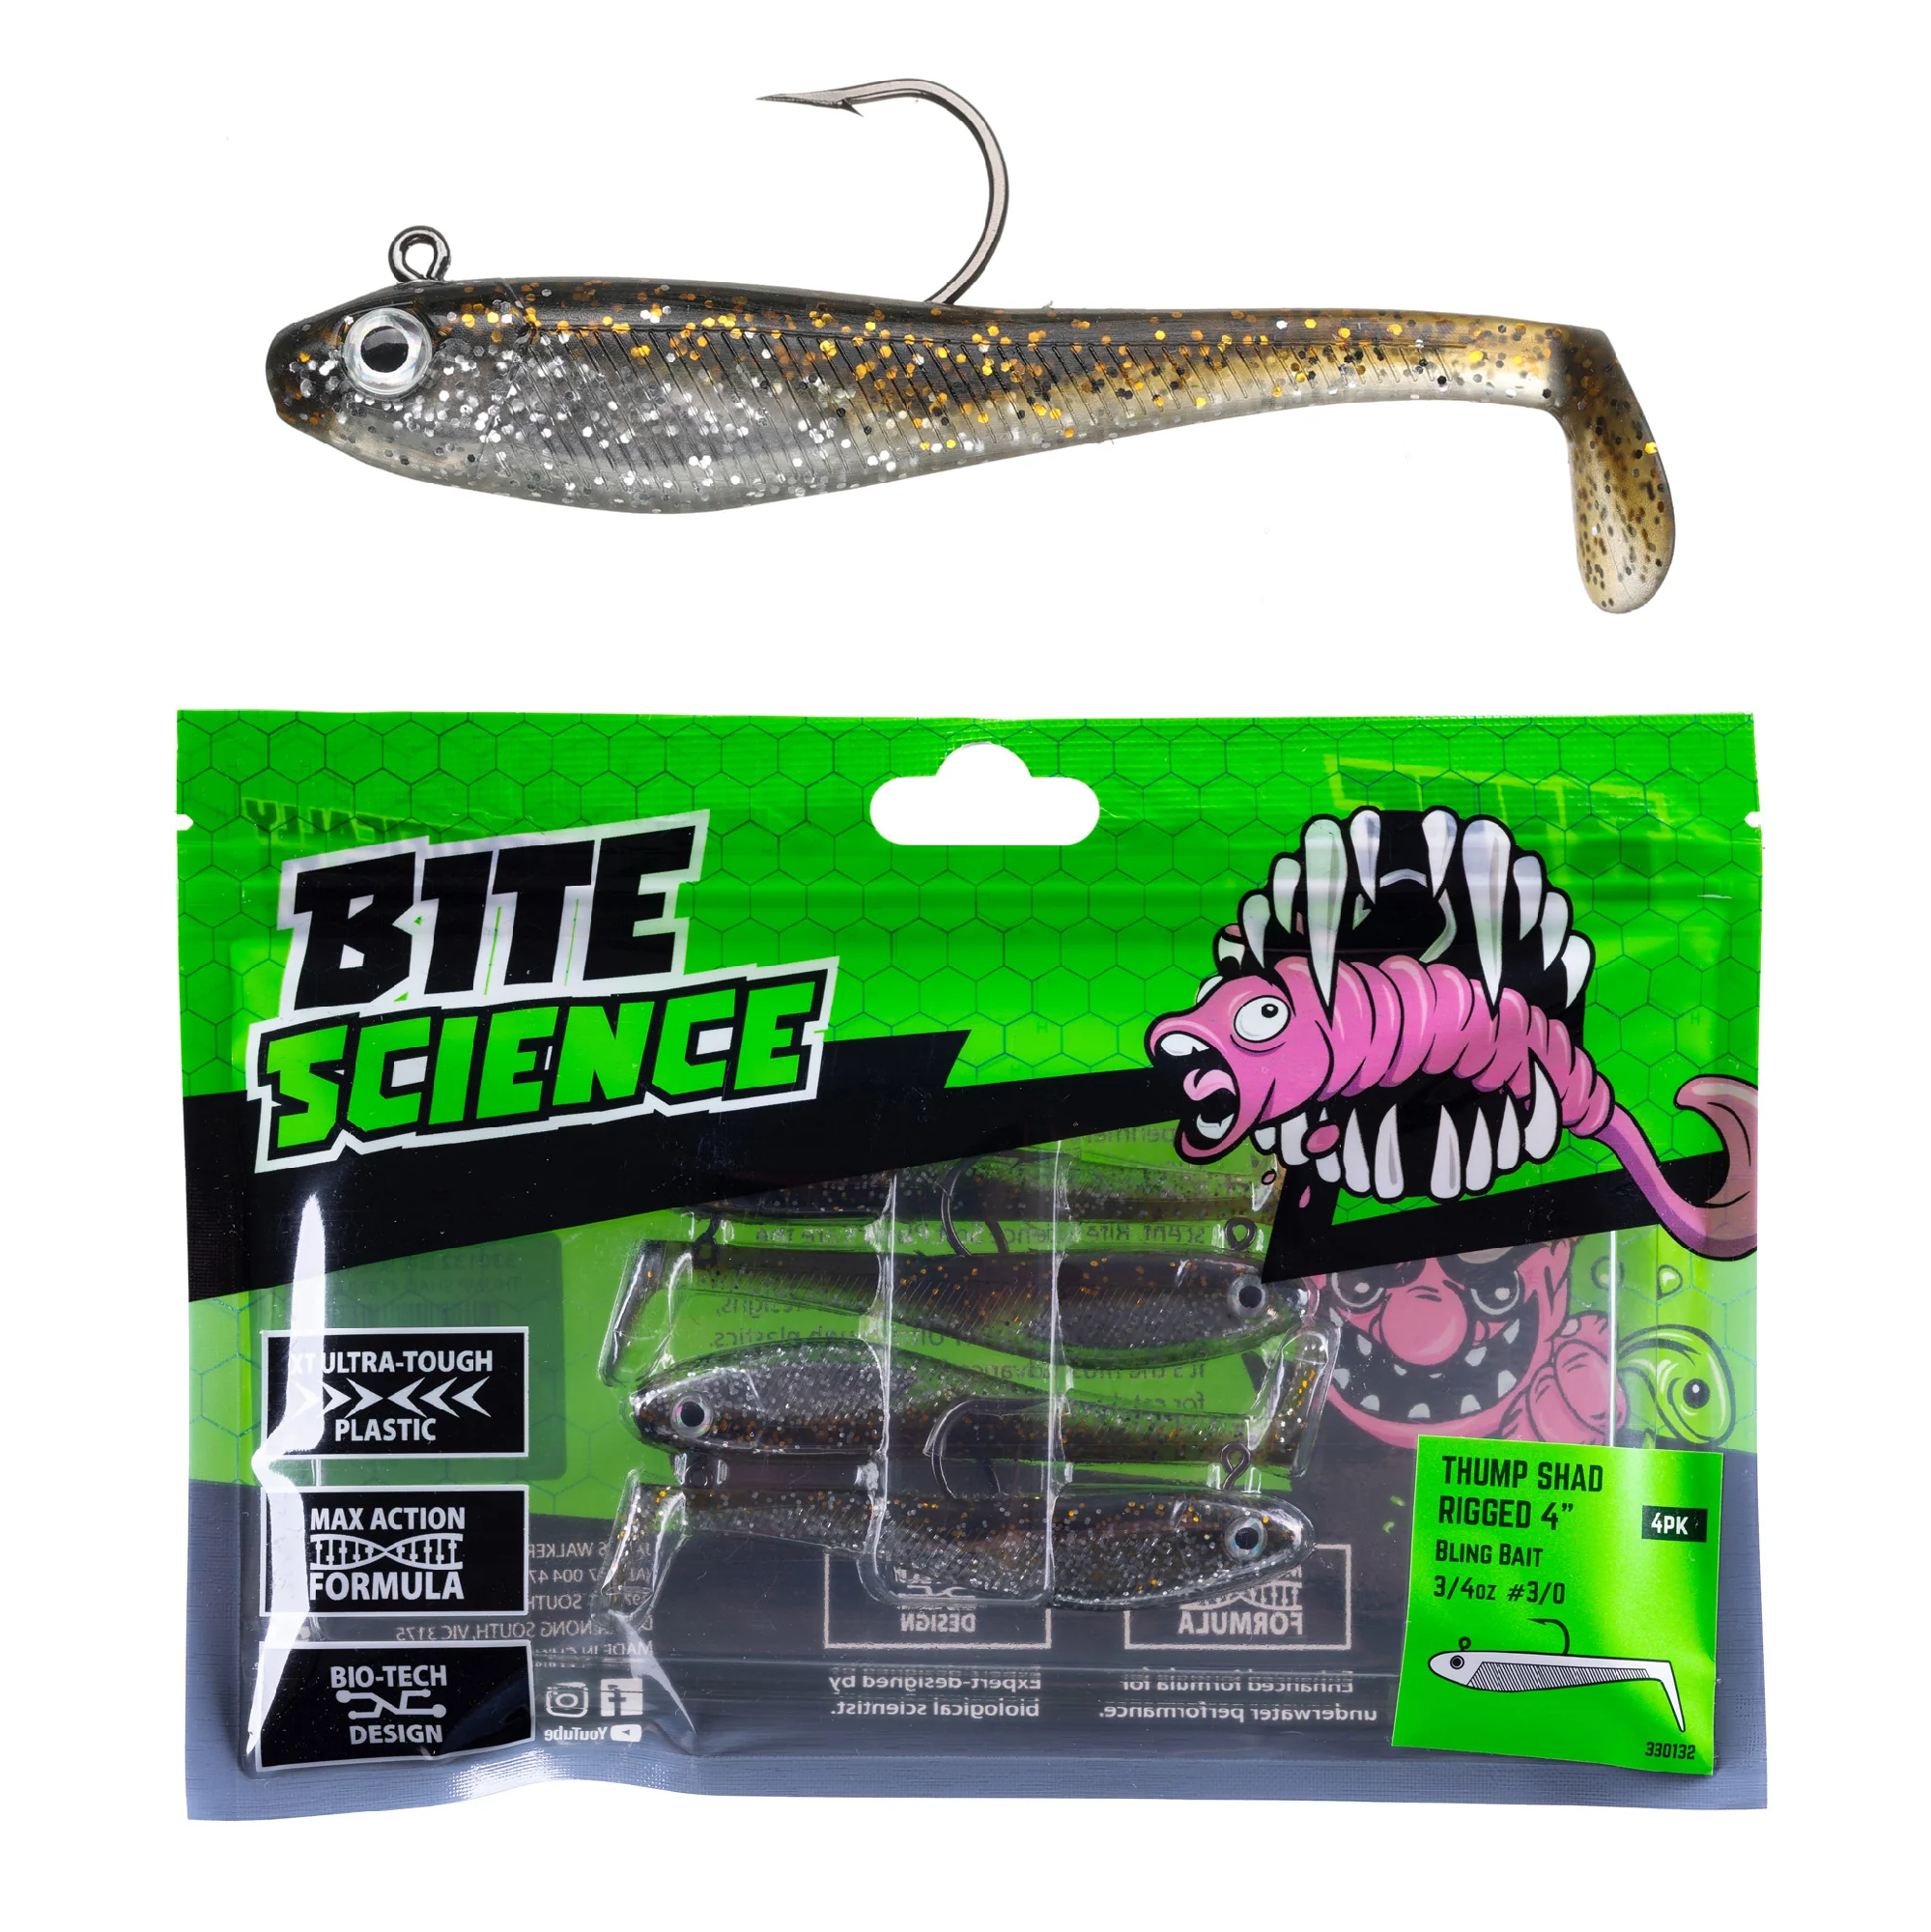 Bite Science 4 Thump Shad Rigged Soft Plastic Lure - Fisho's